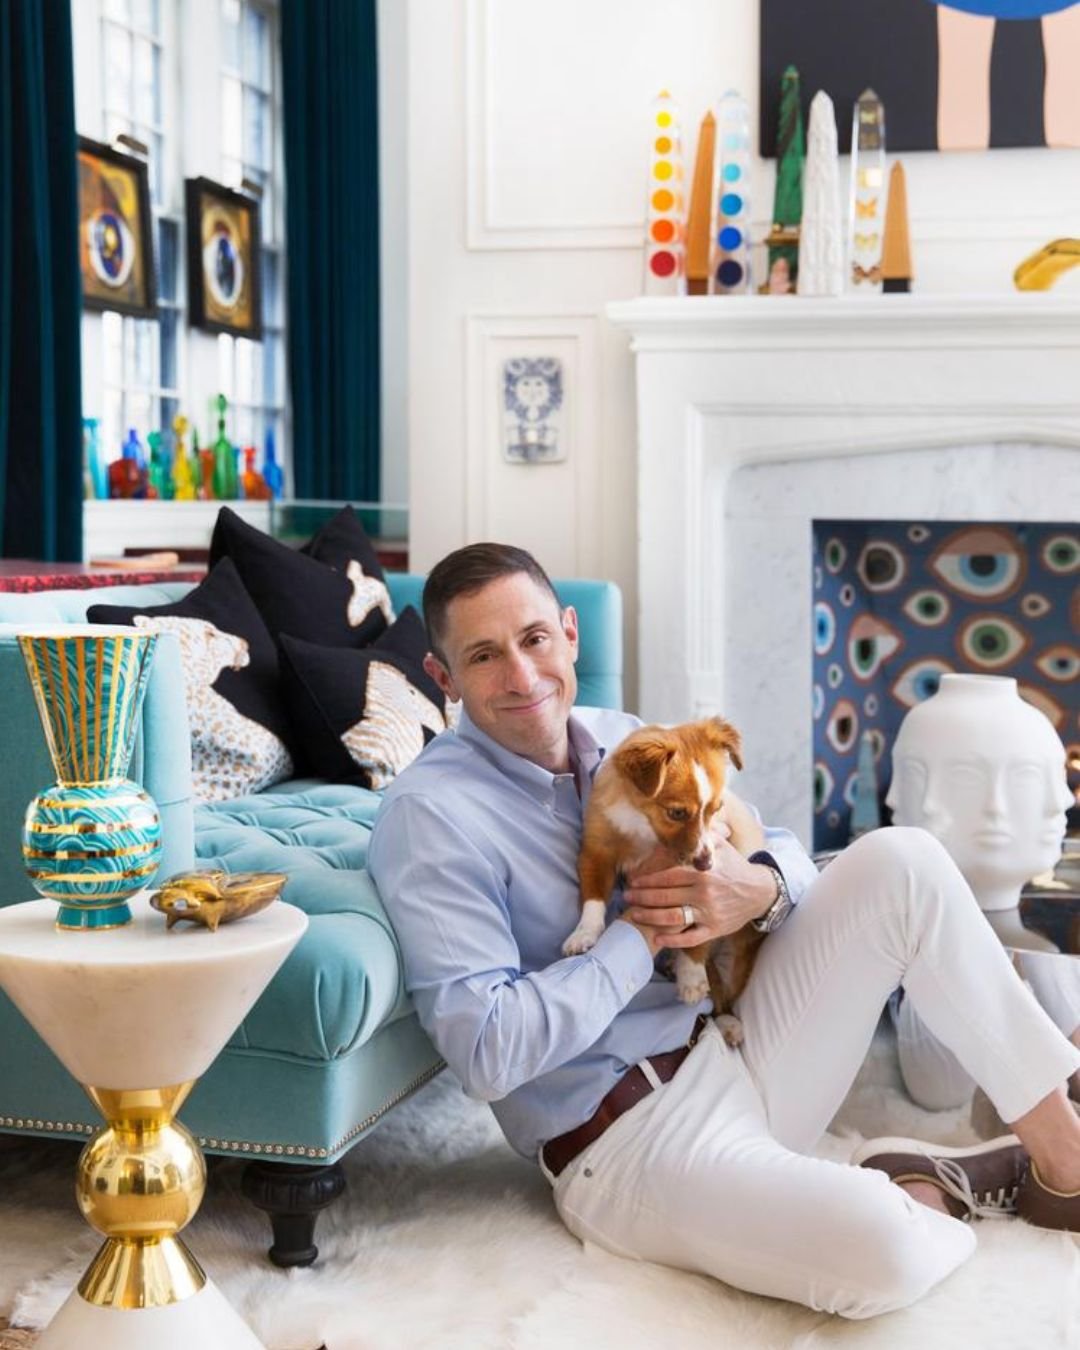 Have you ever heard of &quot;happy chic&quot;? Well, let me introduce you to Jonathan Adler, the mastermind behind this amazing trend! He's all about creating interiors that radiate happiness and style, and he does it with boundless creativity and in